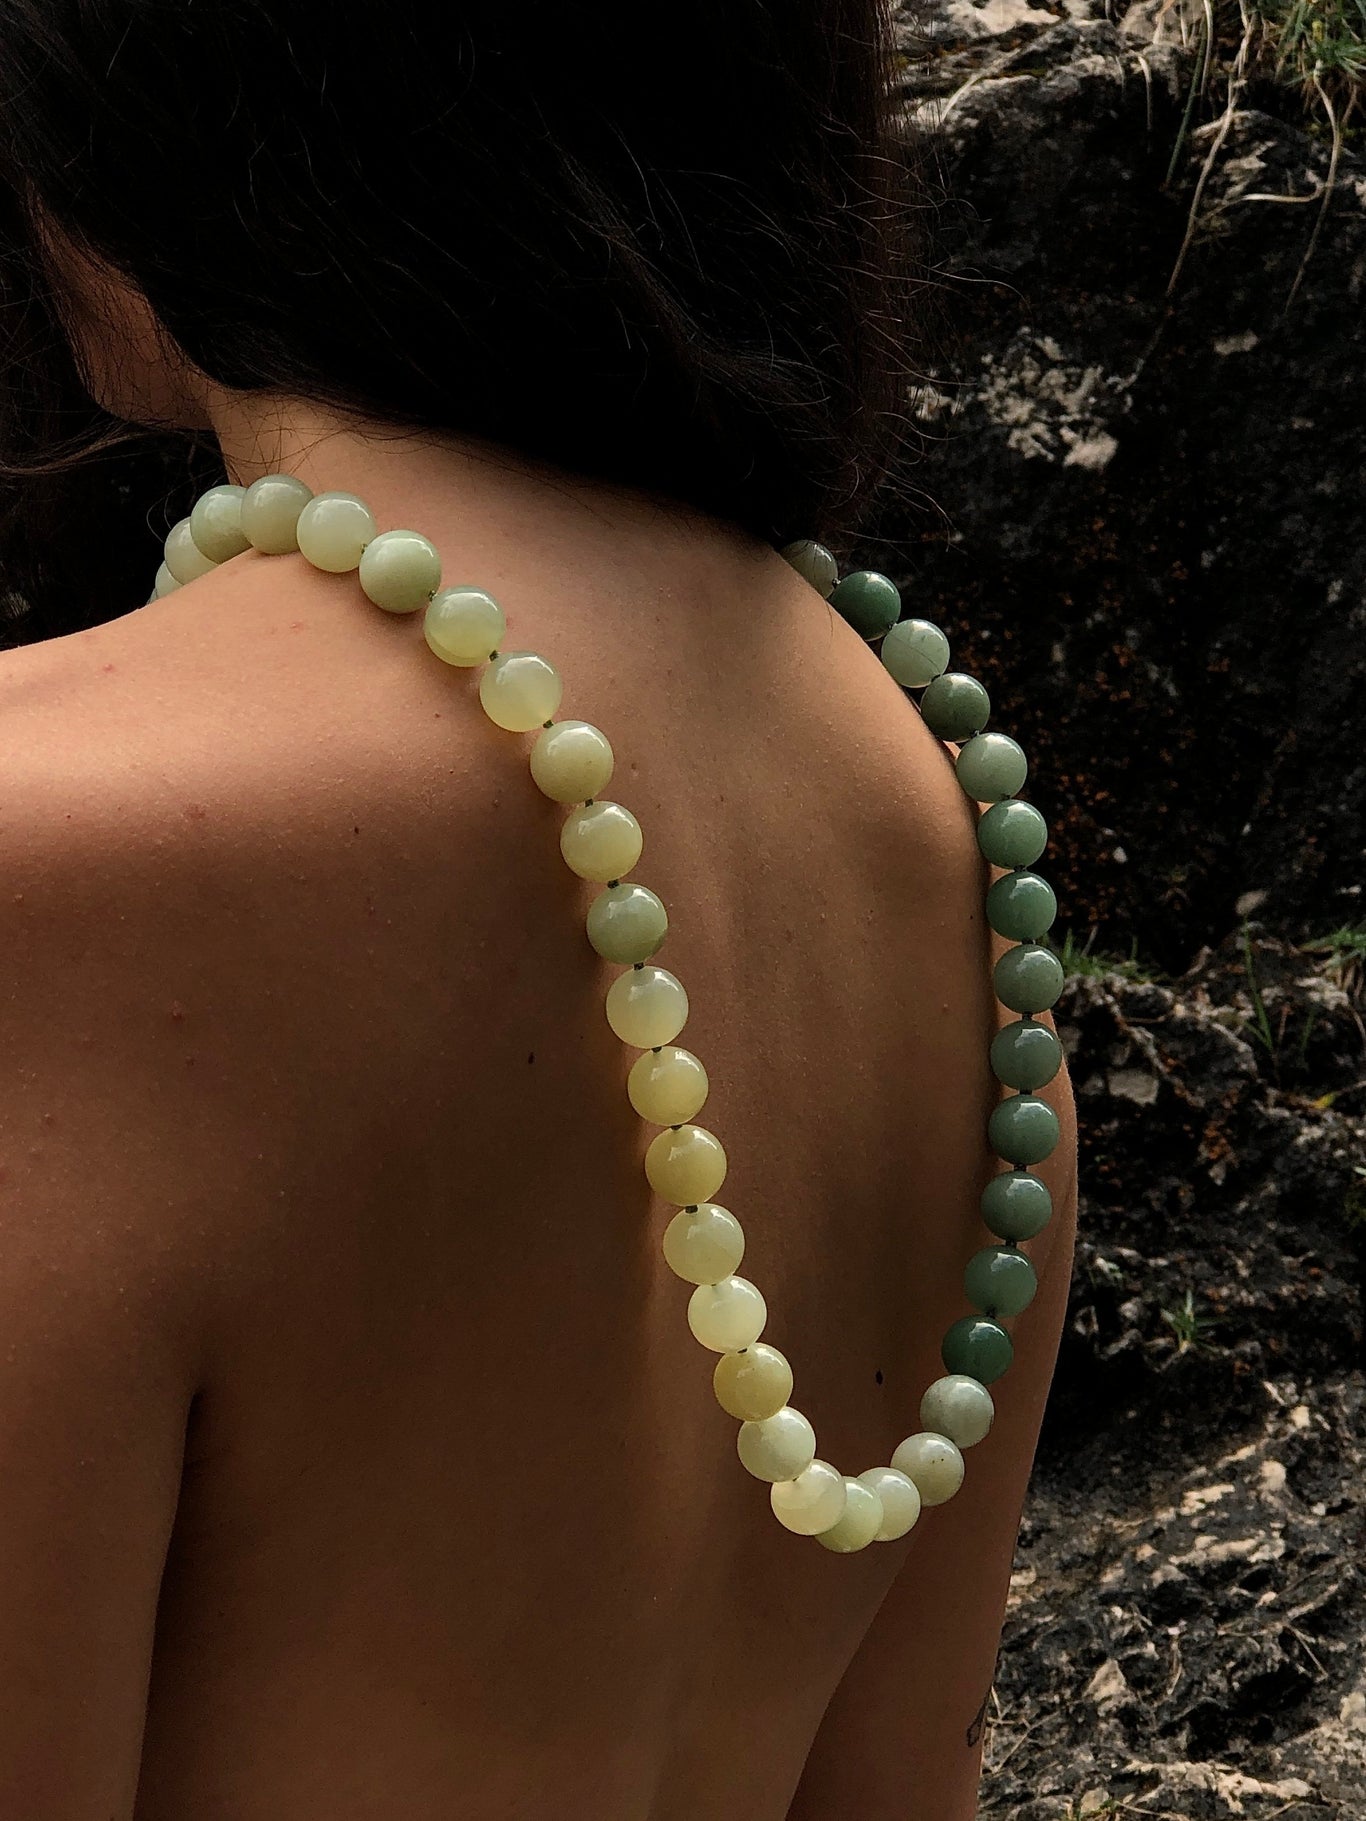 Mussels and Muscles Bicolor Jade Spheres Choker